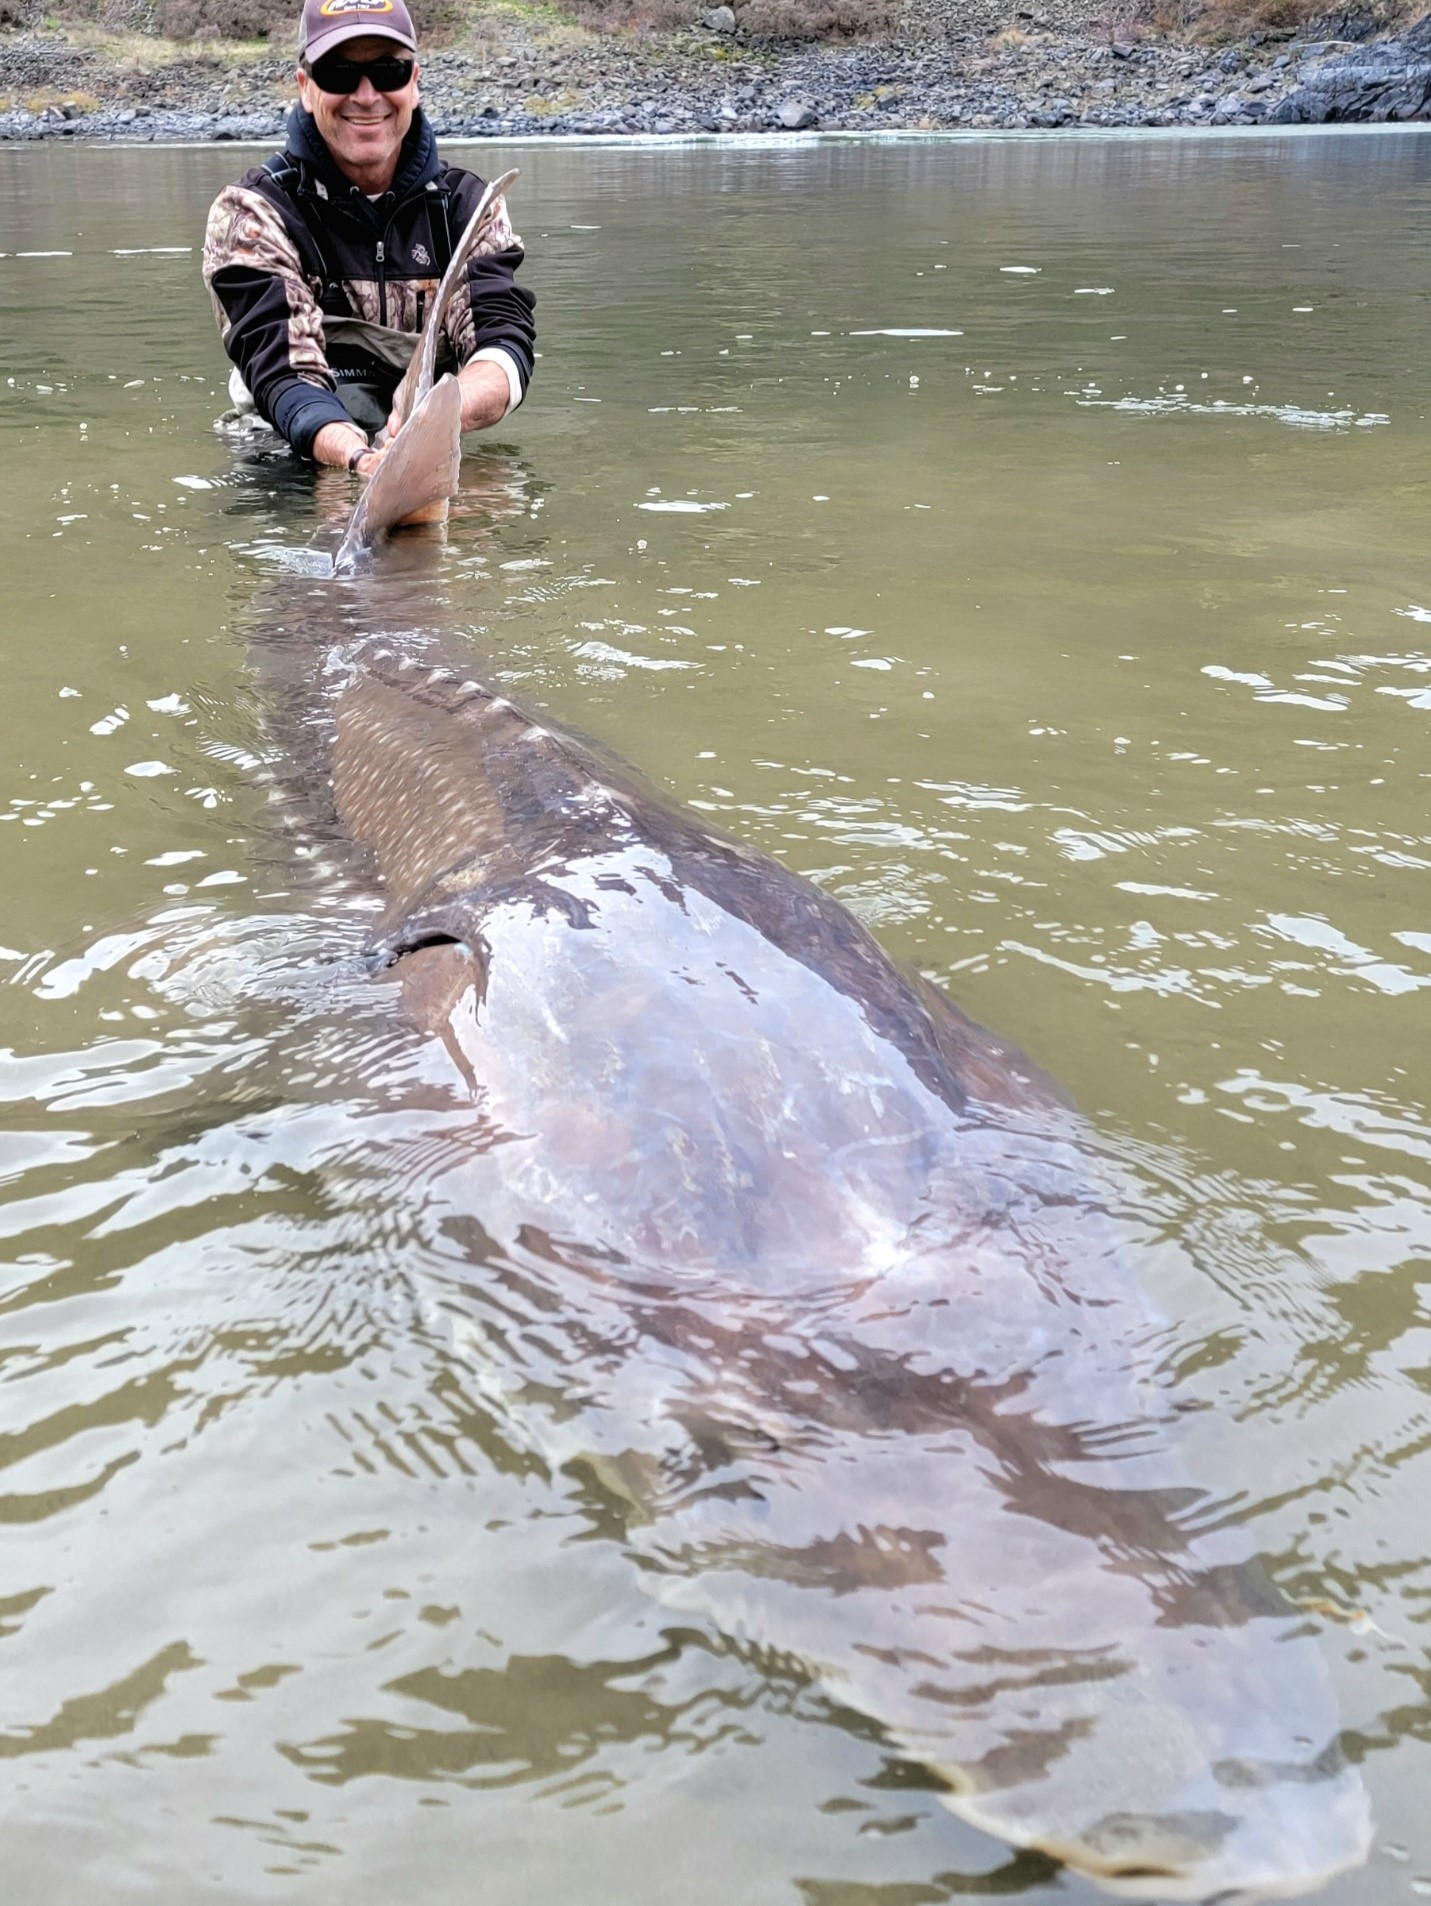 125-Year-Old Lake Sturgeon is Believed to Be The Largest Ever Caught in the U.S. and The Oldest Freshwater Fish Ever Caught in the World